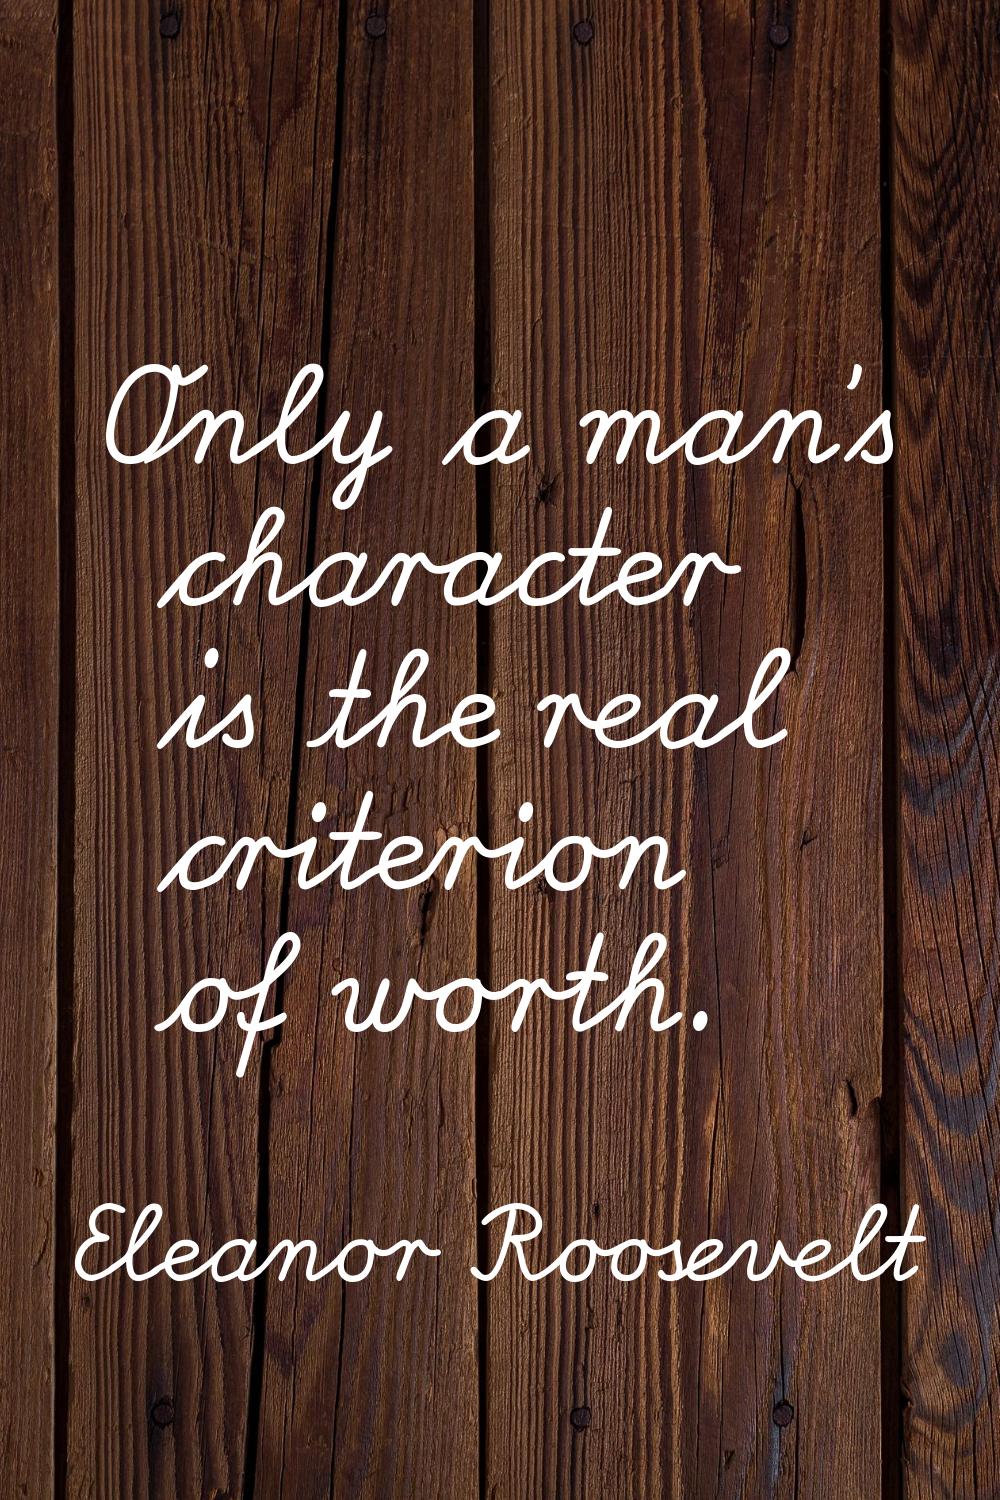 Only a man's character is the real criterion of worth.